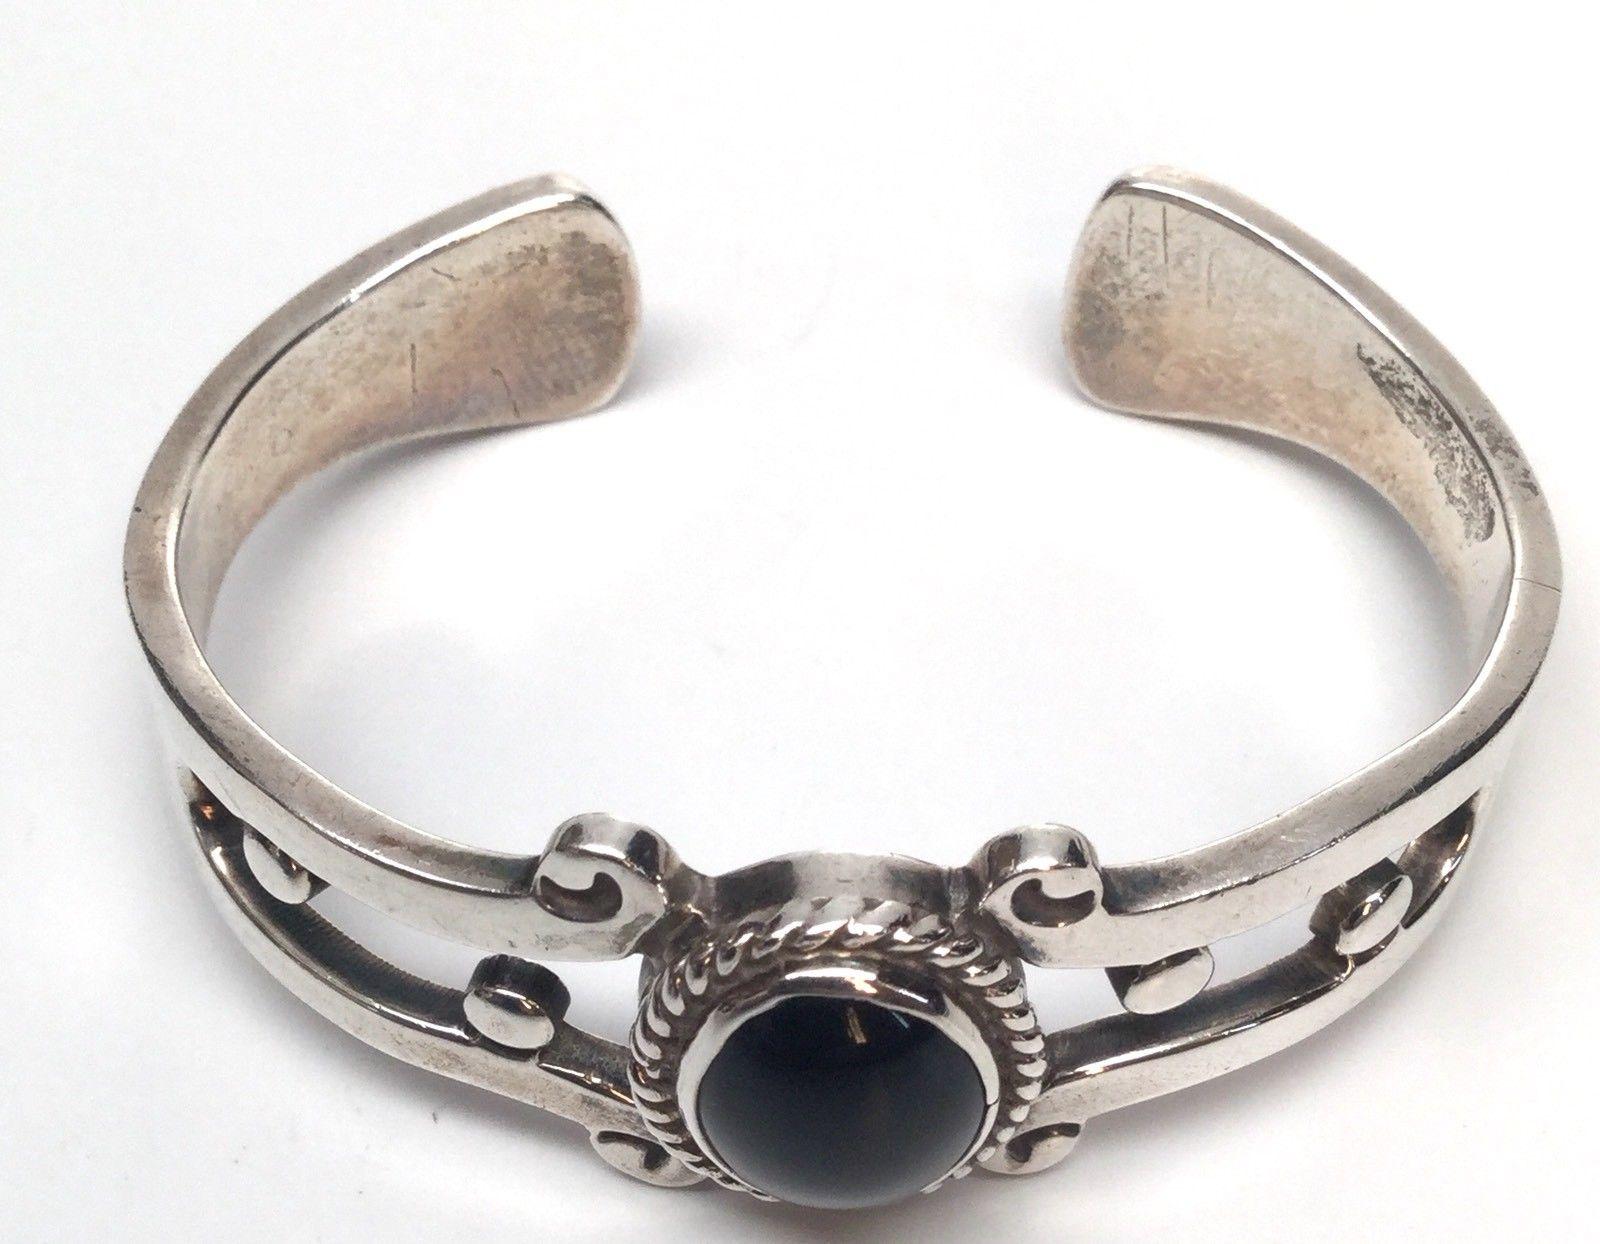 Taxco FDH Sterling Silver Black Onyx Cuff Bracelet
This is a beautiful sterling silver black onyx cuff bracelet by FDH.

Measurement:  Approx 6 inches.  Stone measures approx. 12 mm x 9 mm.  Approx 12 mm in height.

Weight:  38.6 g / 24.8